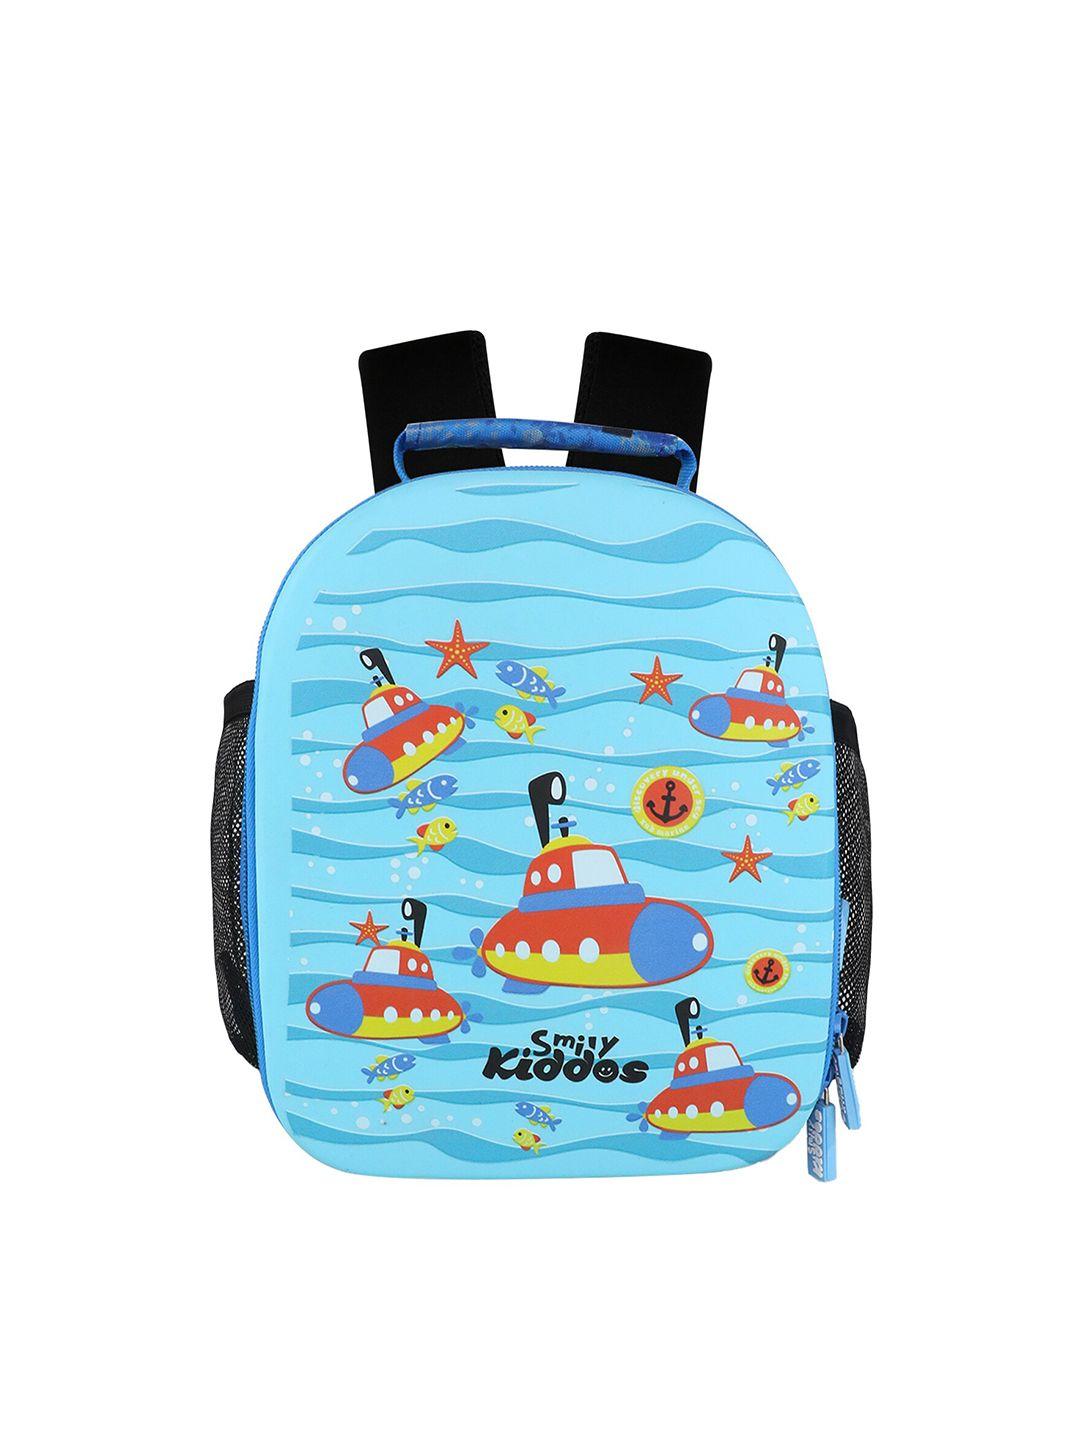 smily kiddos kids blue & red graphic printed backpack with compression straps